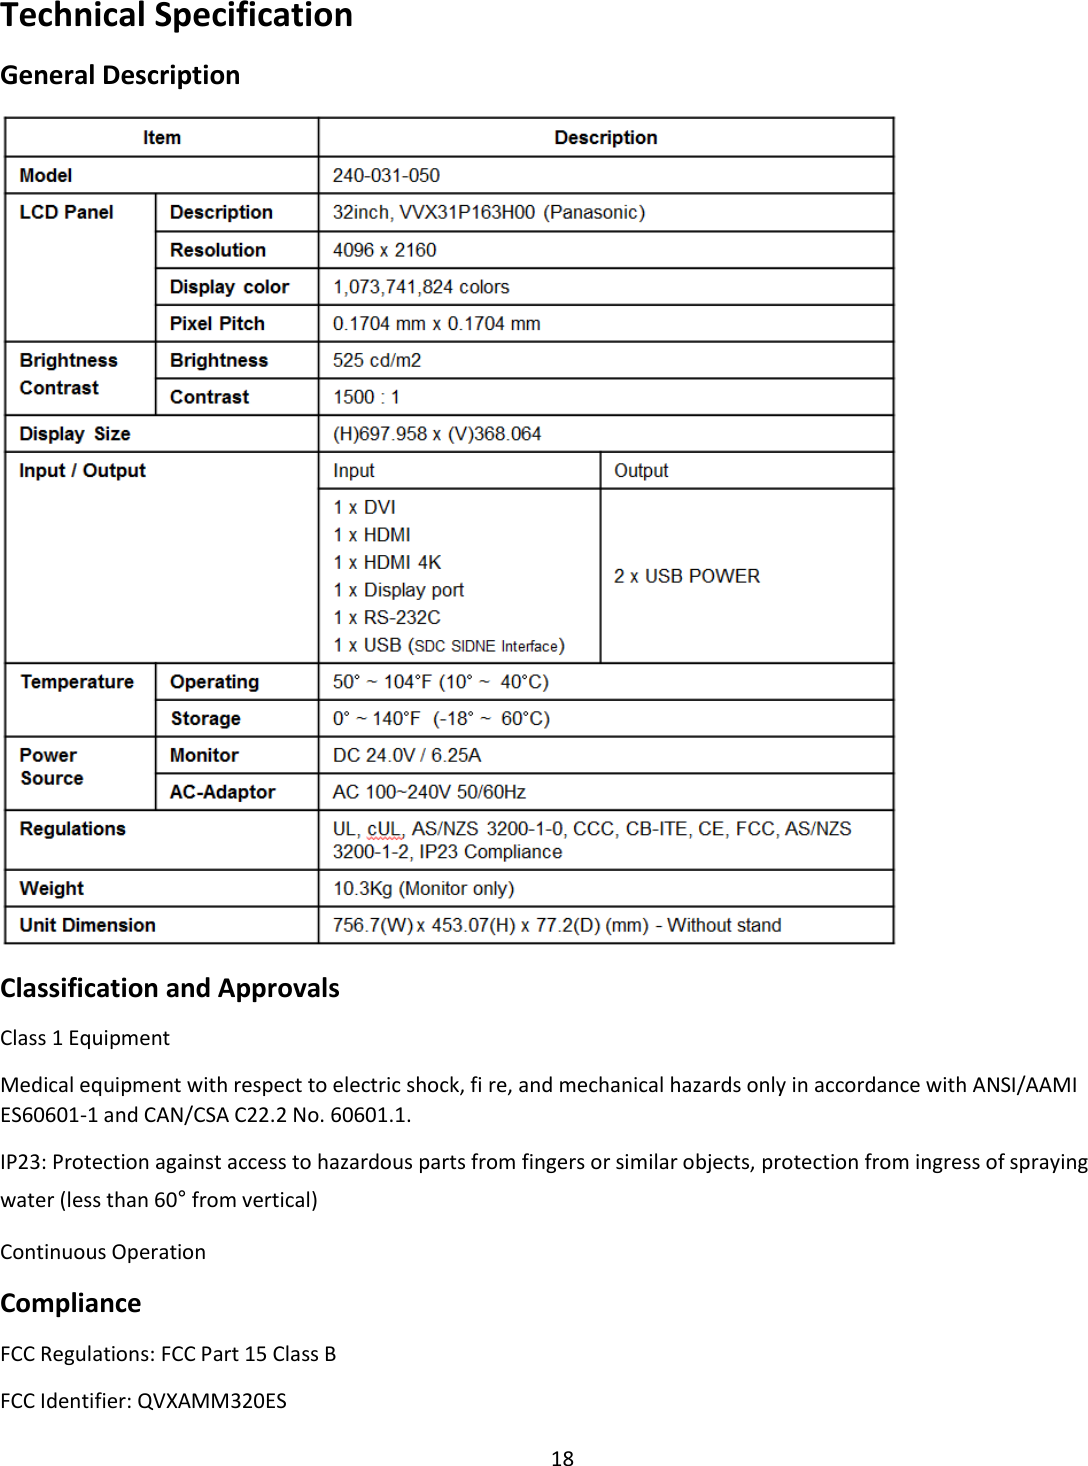 18 Technical Specification General Description  Classification and Approvals Class 1 Equipment Medical equipment with respect to electric shock, fi re, and mechanical hazards only in accordance with ANSI/AAMI ES60601-1 and CAN/CSA C22.2 No. 60601.1. IP23: Protection against access to hazardous parts from fingers or similar objects, protection from ingress of spraying water (less than 60° from vertical) Continuous Operation Compliance FCC Regulations: FCC Part 15 Class B     FCC Identifier: QVXAMM320ES   